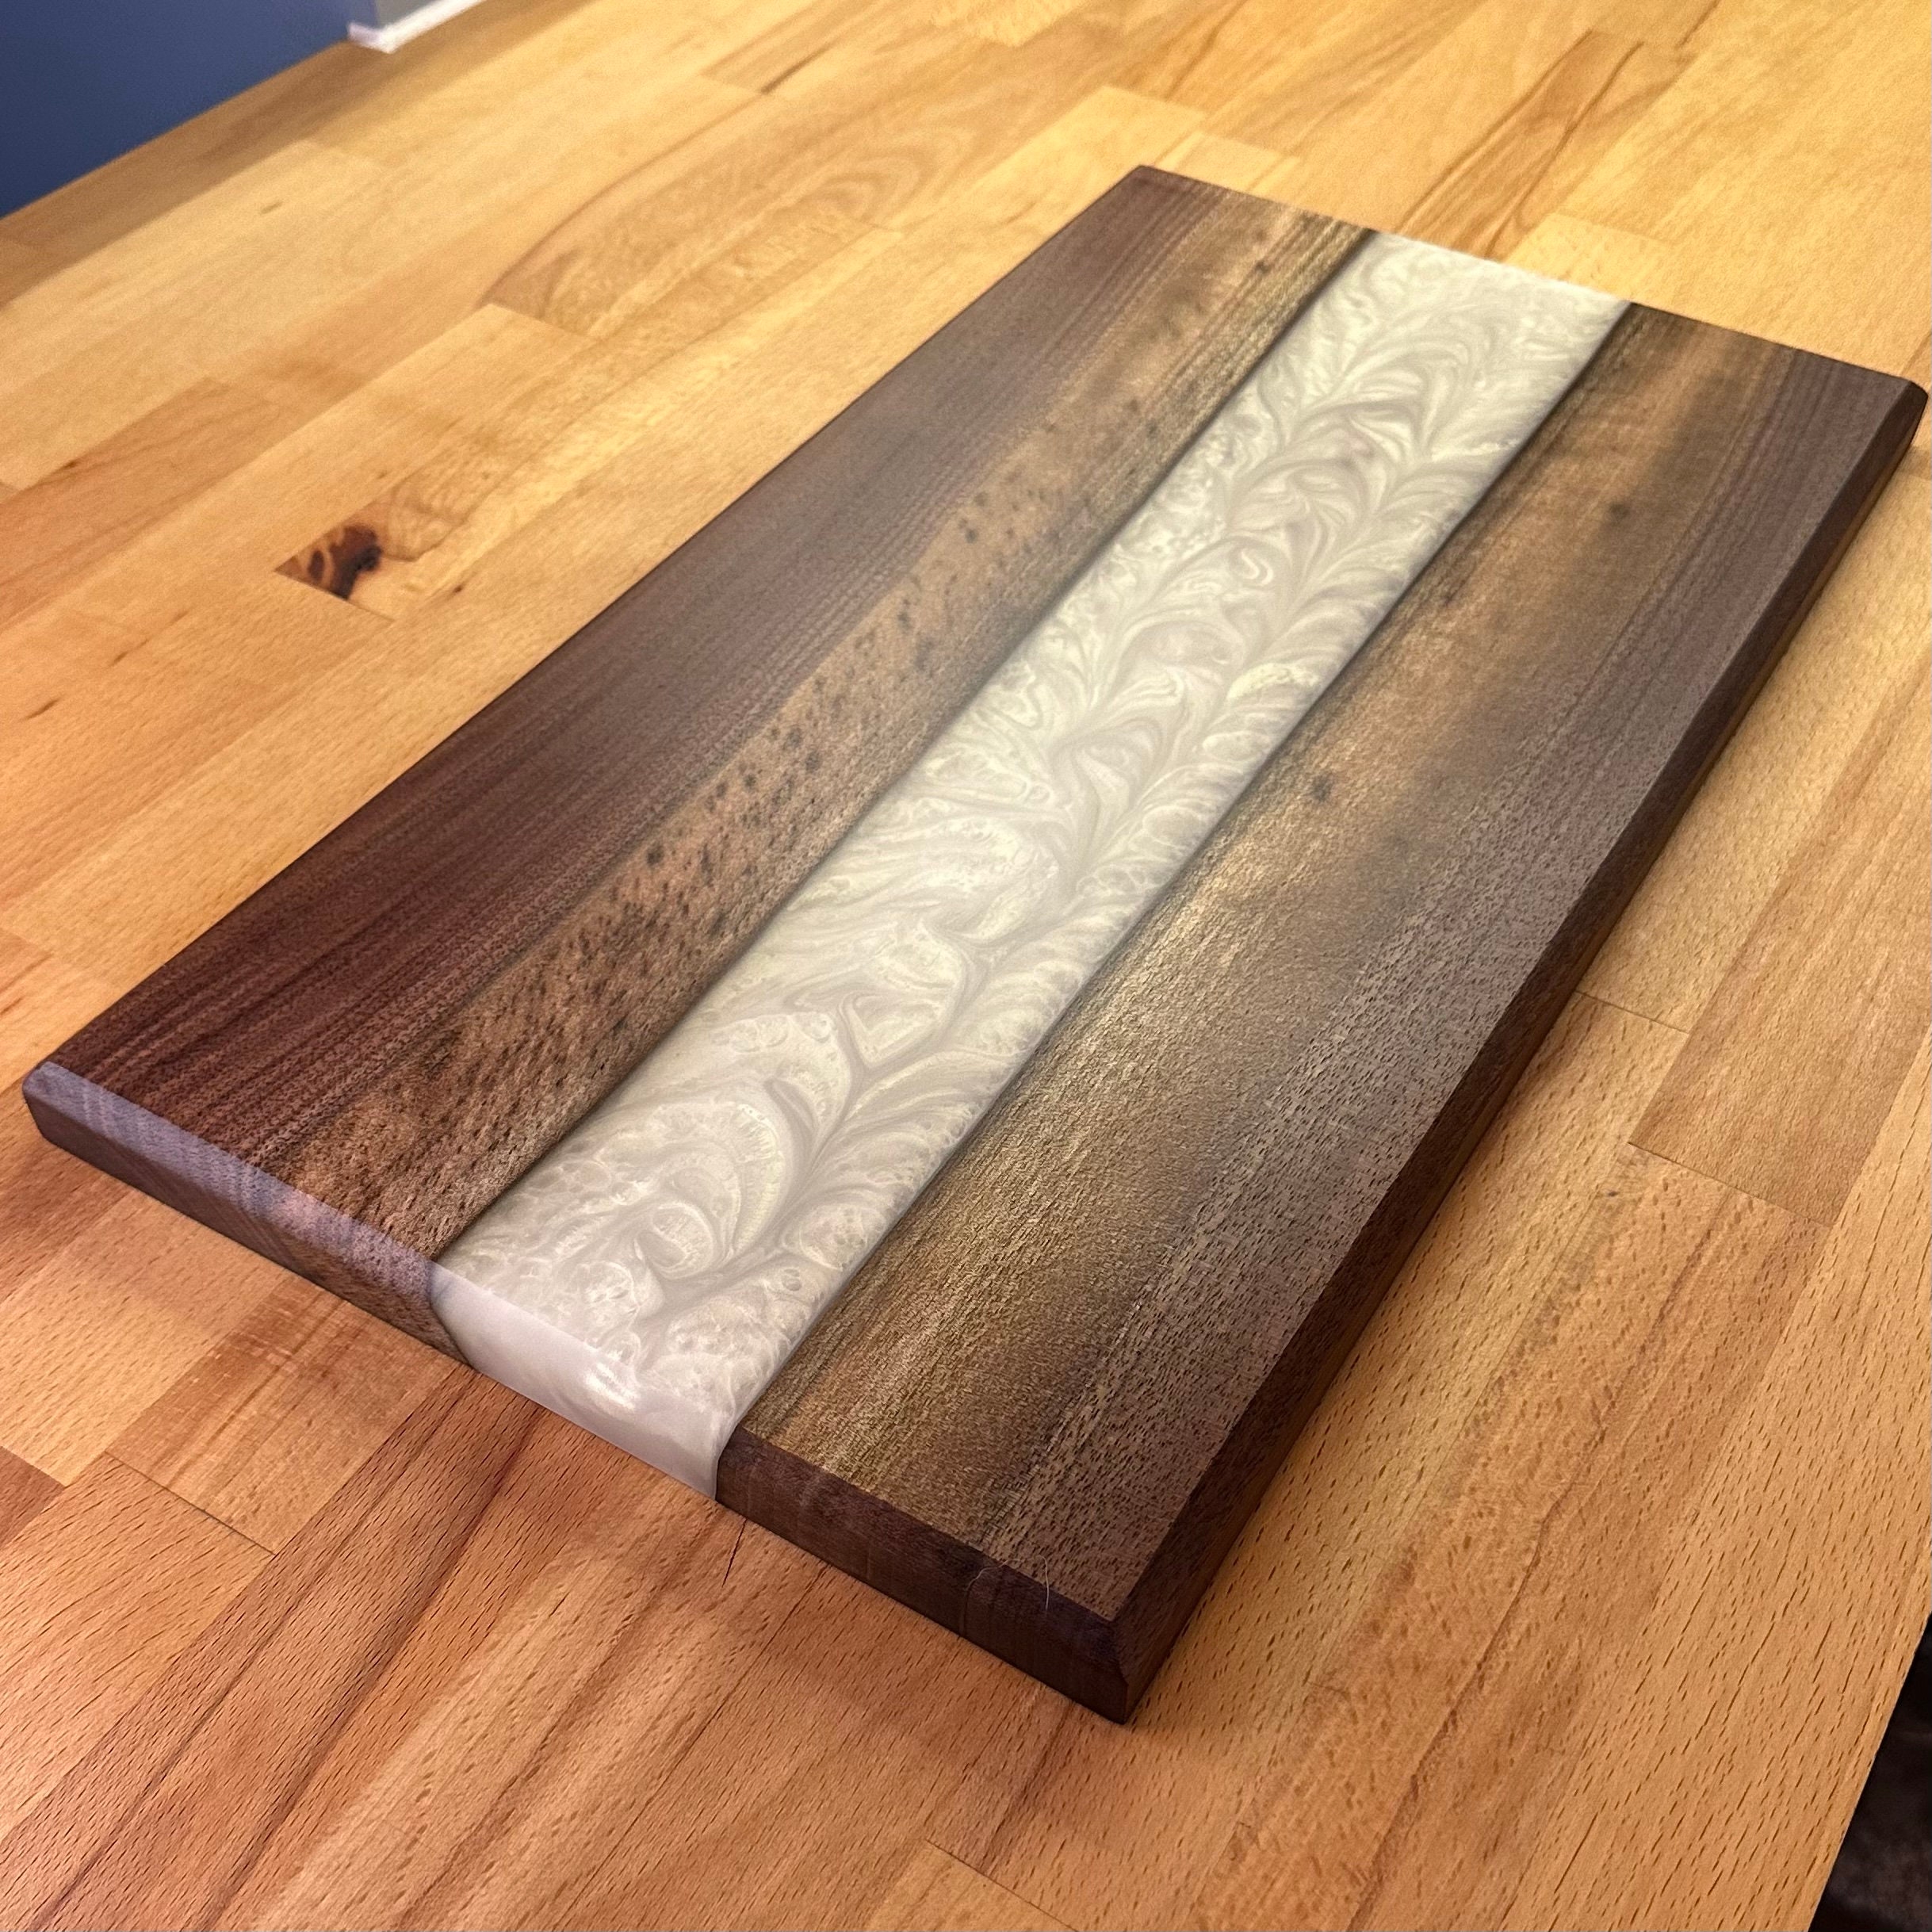 Extra Large Wood Cutting Board With Feet, Pocket Handles and Juice Groove,  24x18x1.25 Inches Thick Cutting Board Handmade in the USA 